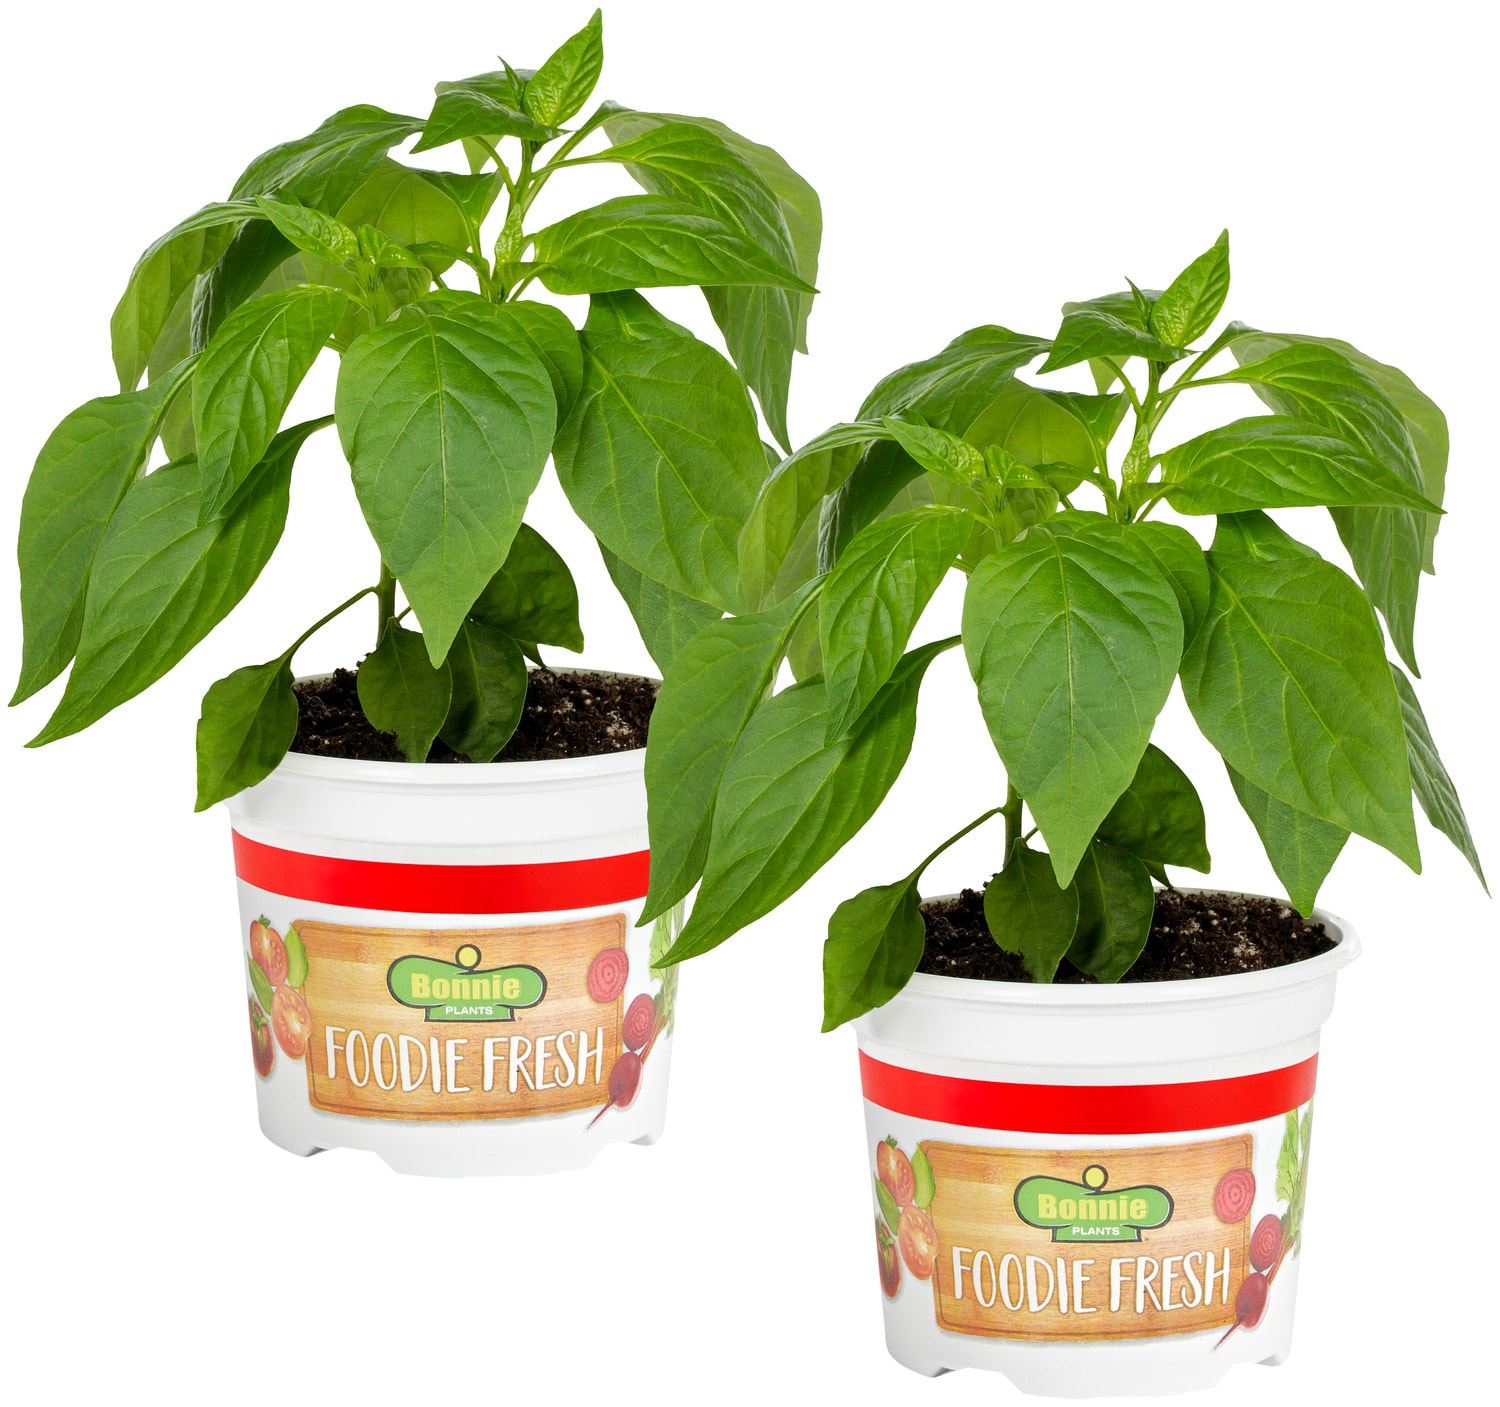 Lowe's Tomato Assortment Plant in the Vegetable Plants department at